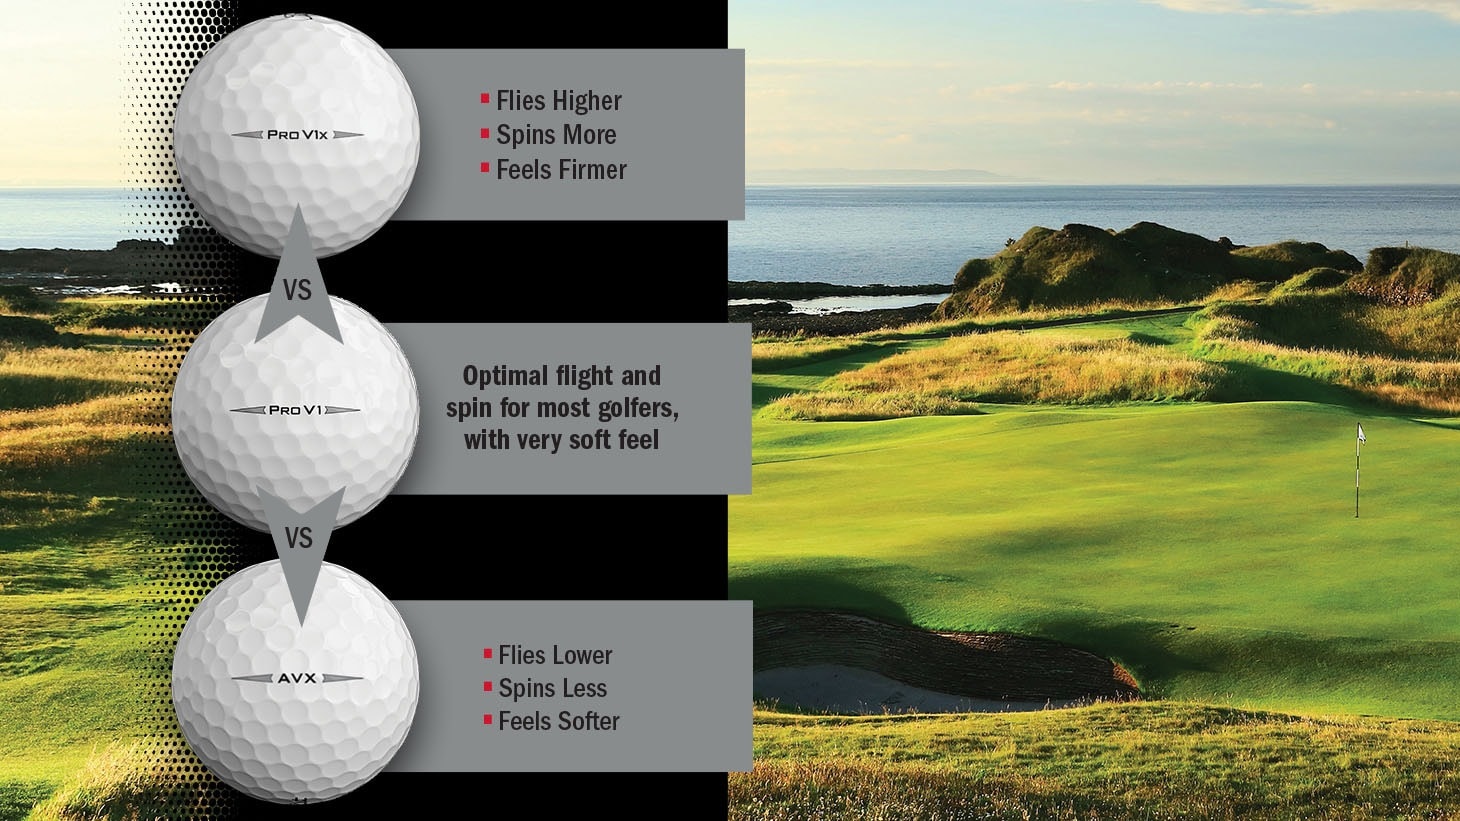 Graphic comparing performance differences between new 2019 Pro V1, new 2019 Pro V1x and AVX golf balls from Titleist